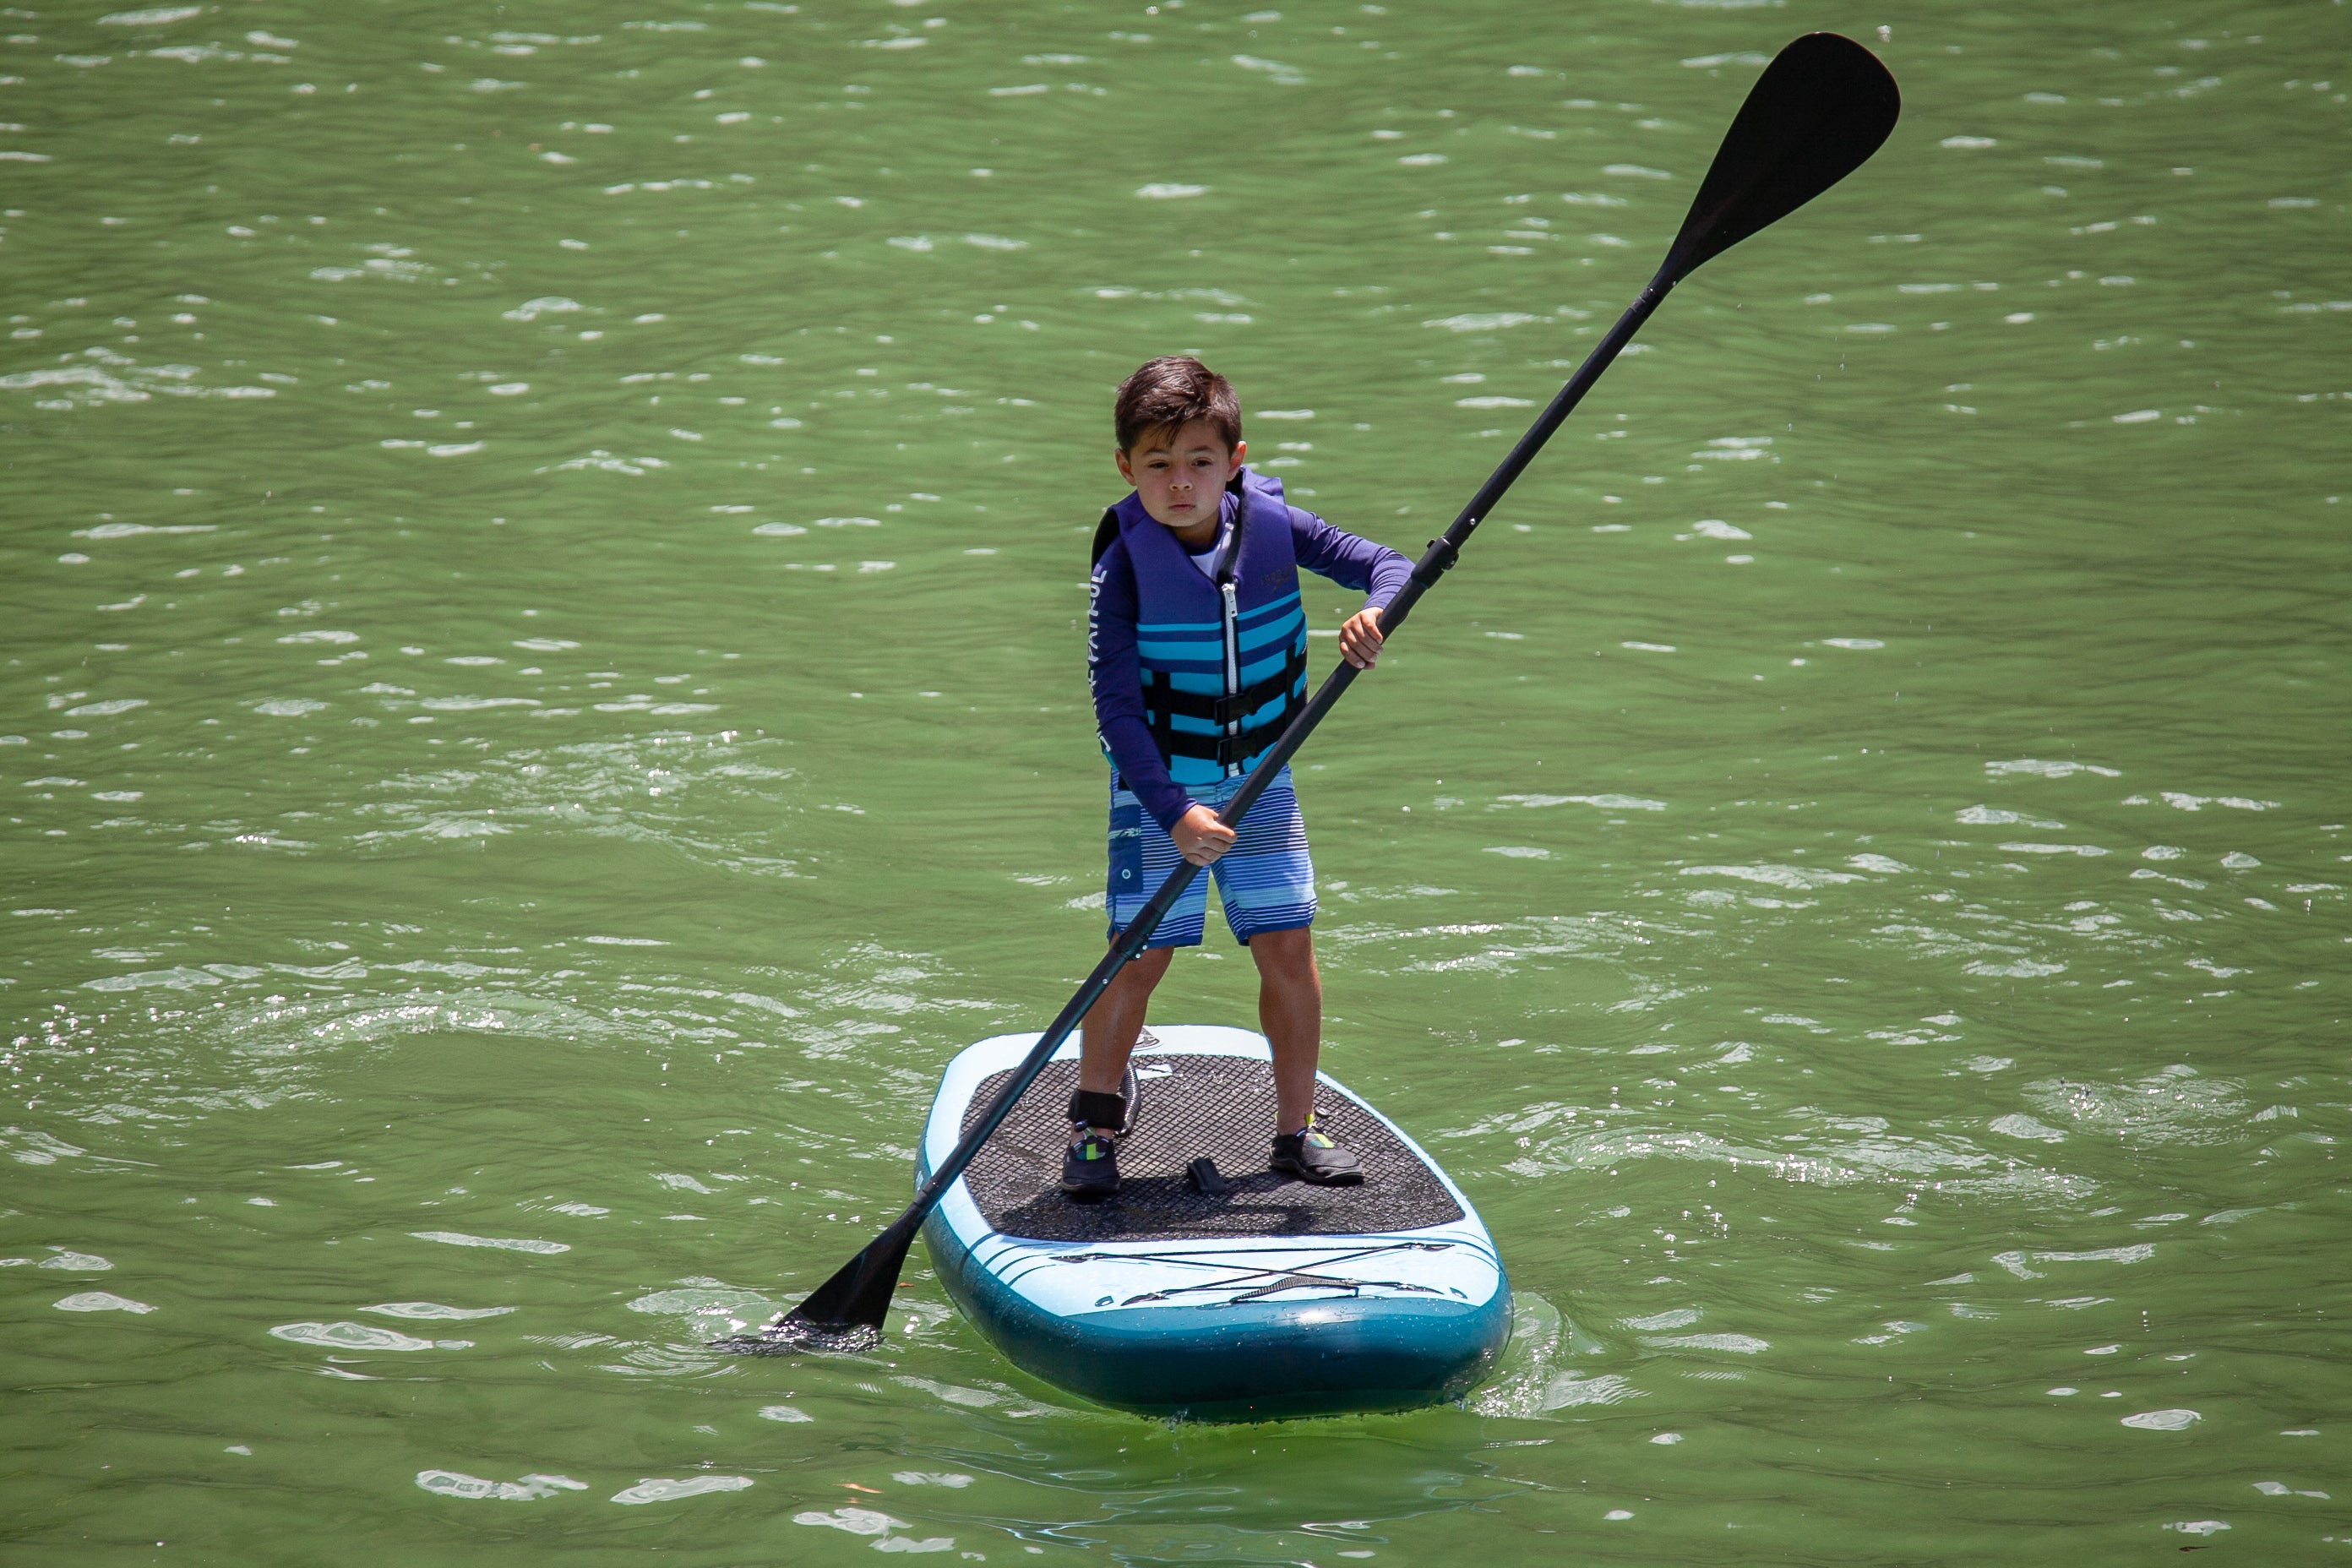 The J8 Junior Cruiser is the perfect SUP board the little adventurers! The smaller dimensions offer a more manageable and lightweight design to make sure your little ones are safe and having fun on the water. The J8 Cruiser is made with super durable and long lasting military grade 2-ply PVC, as well as drop stitch technology which makes an inflatable just as rigid and stable as a hard board.